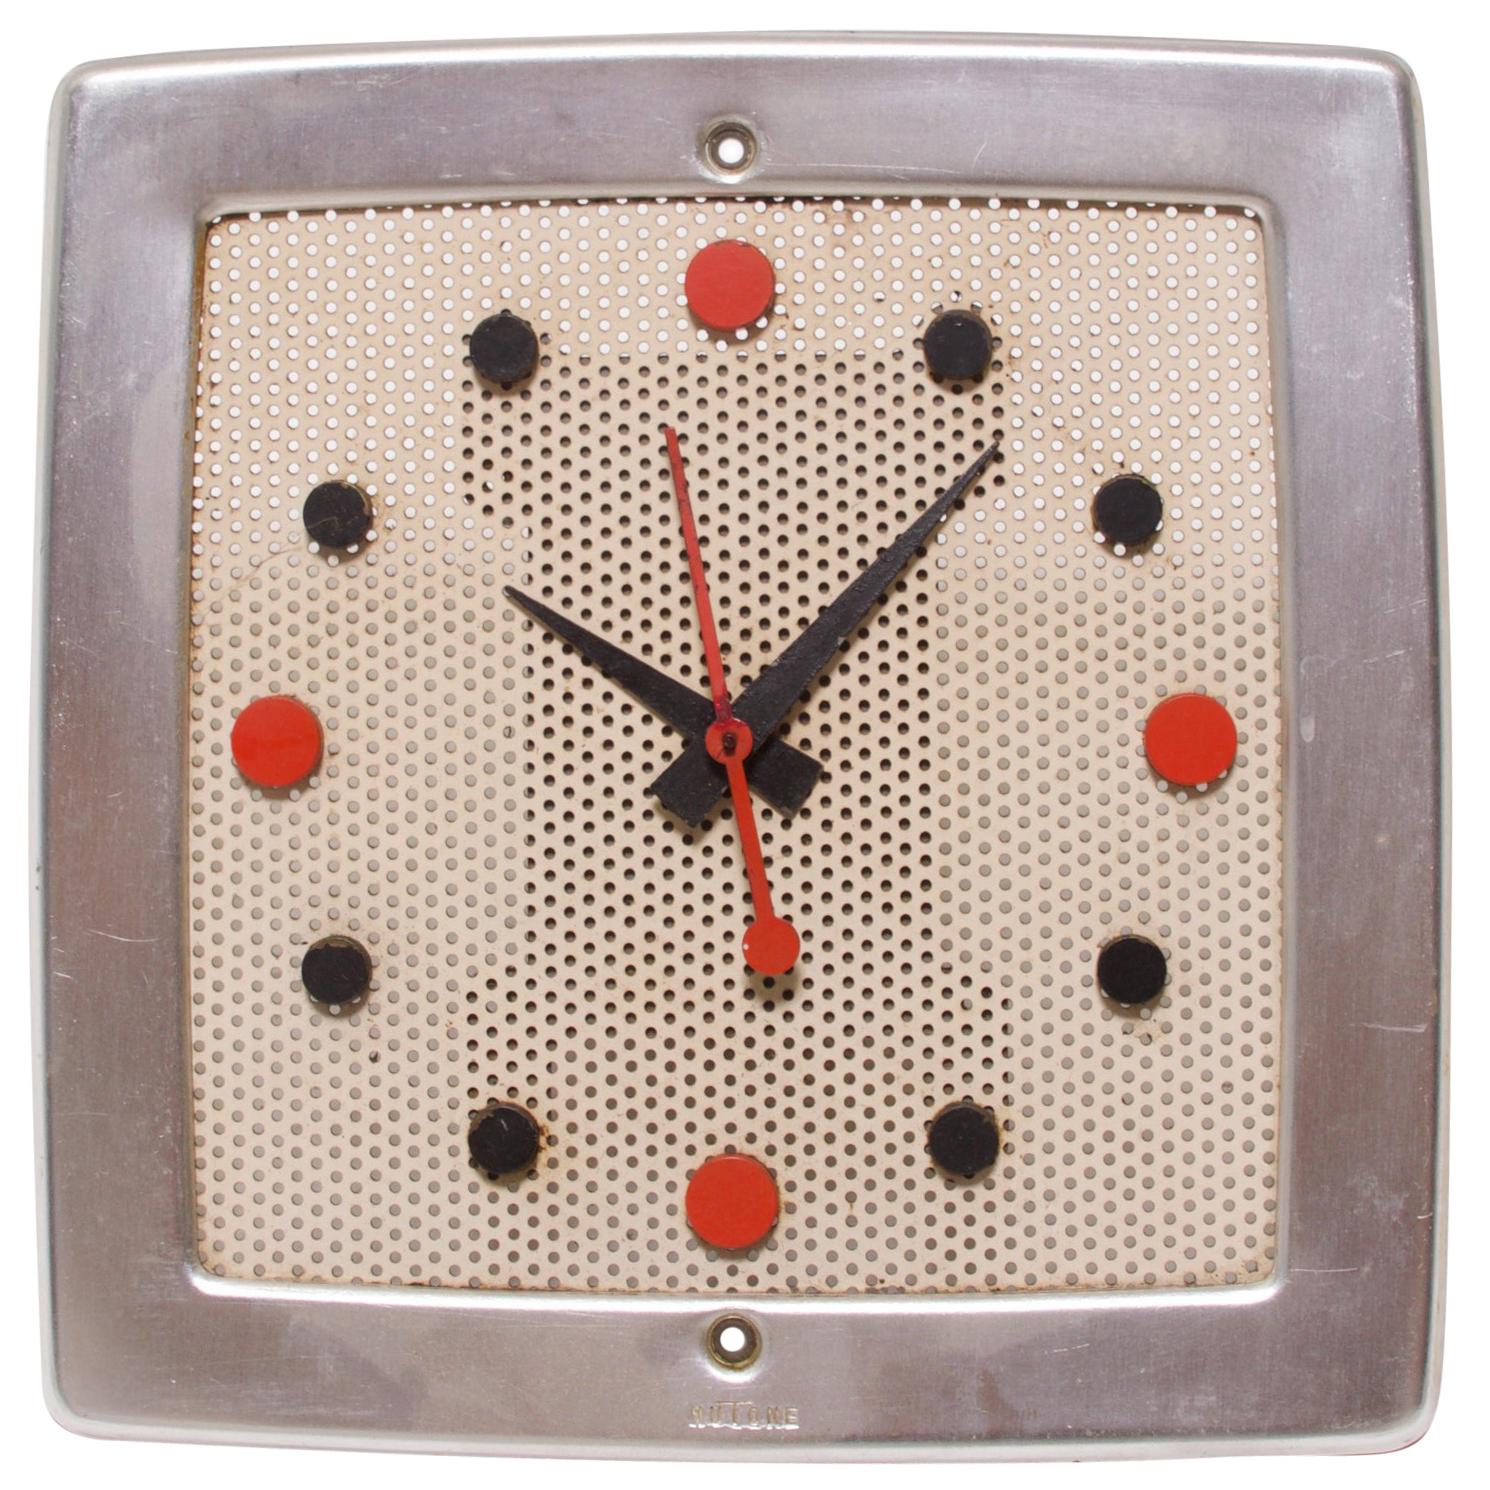 1957 Classic Wall Clock Nu Tone Chime L35 Perforated Metal Howard Miller Style